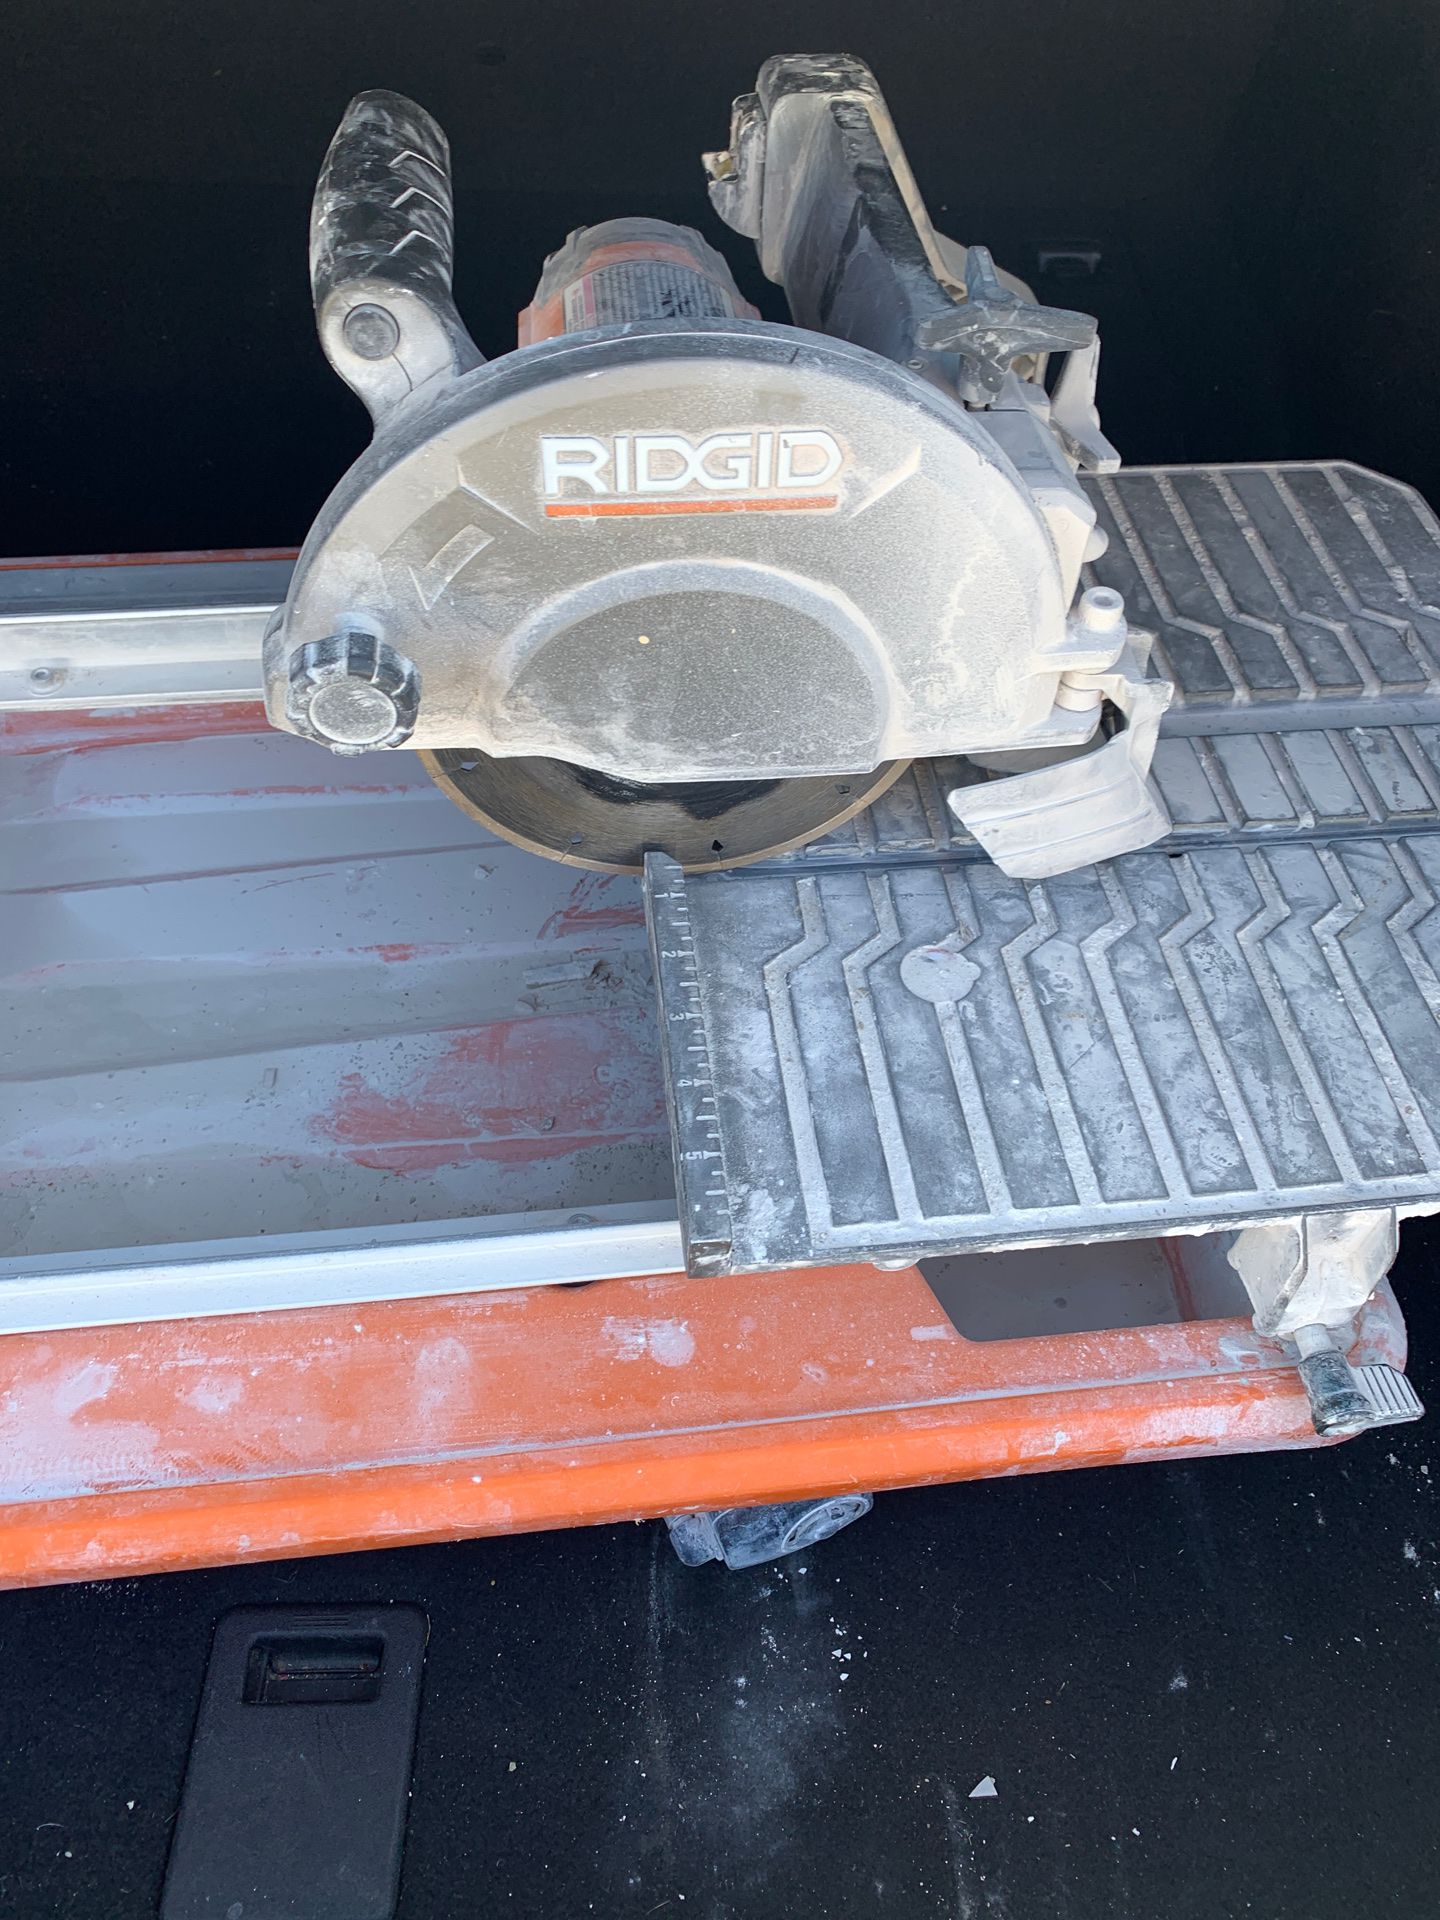 Rigid table saw tile cutter (broken head) needs to be welded or soldered